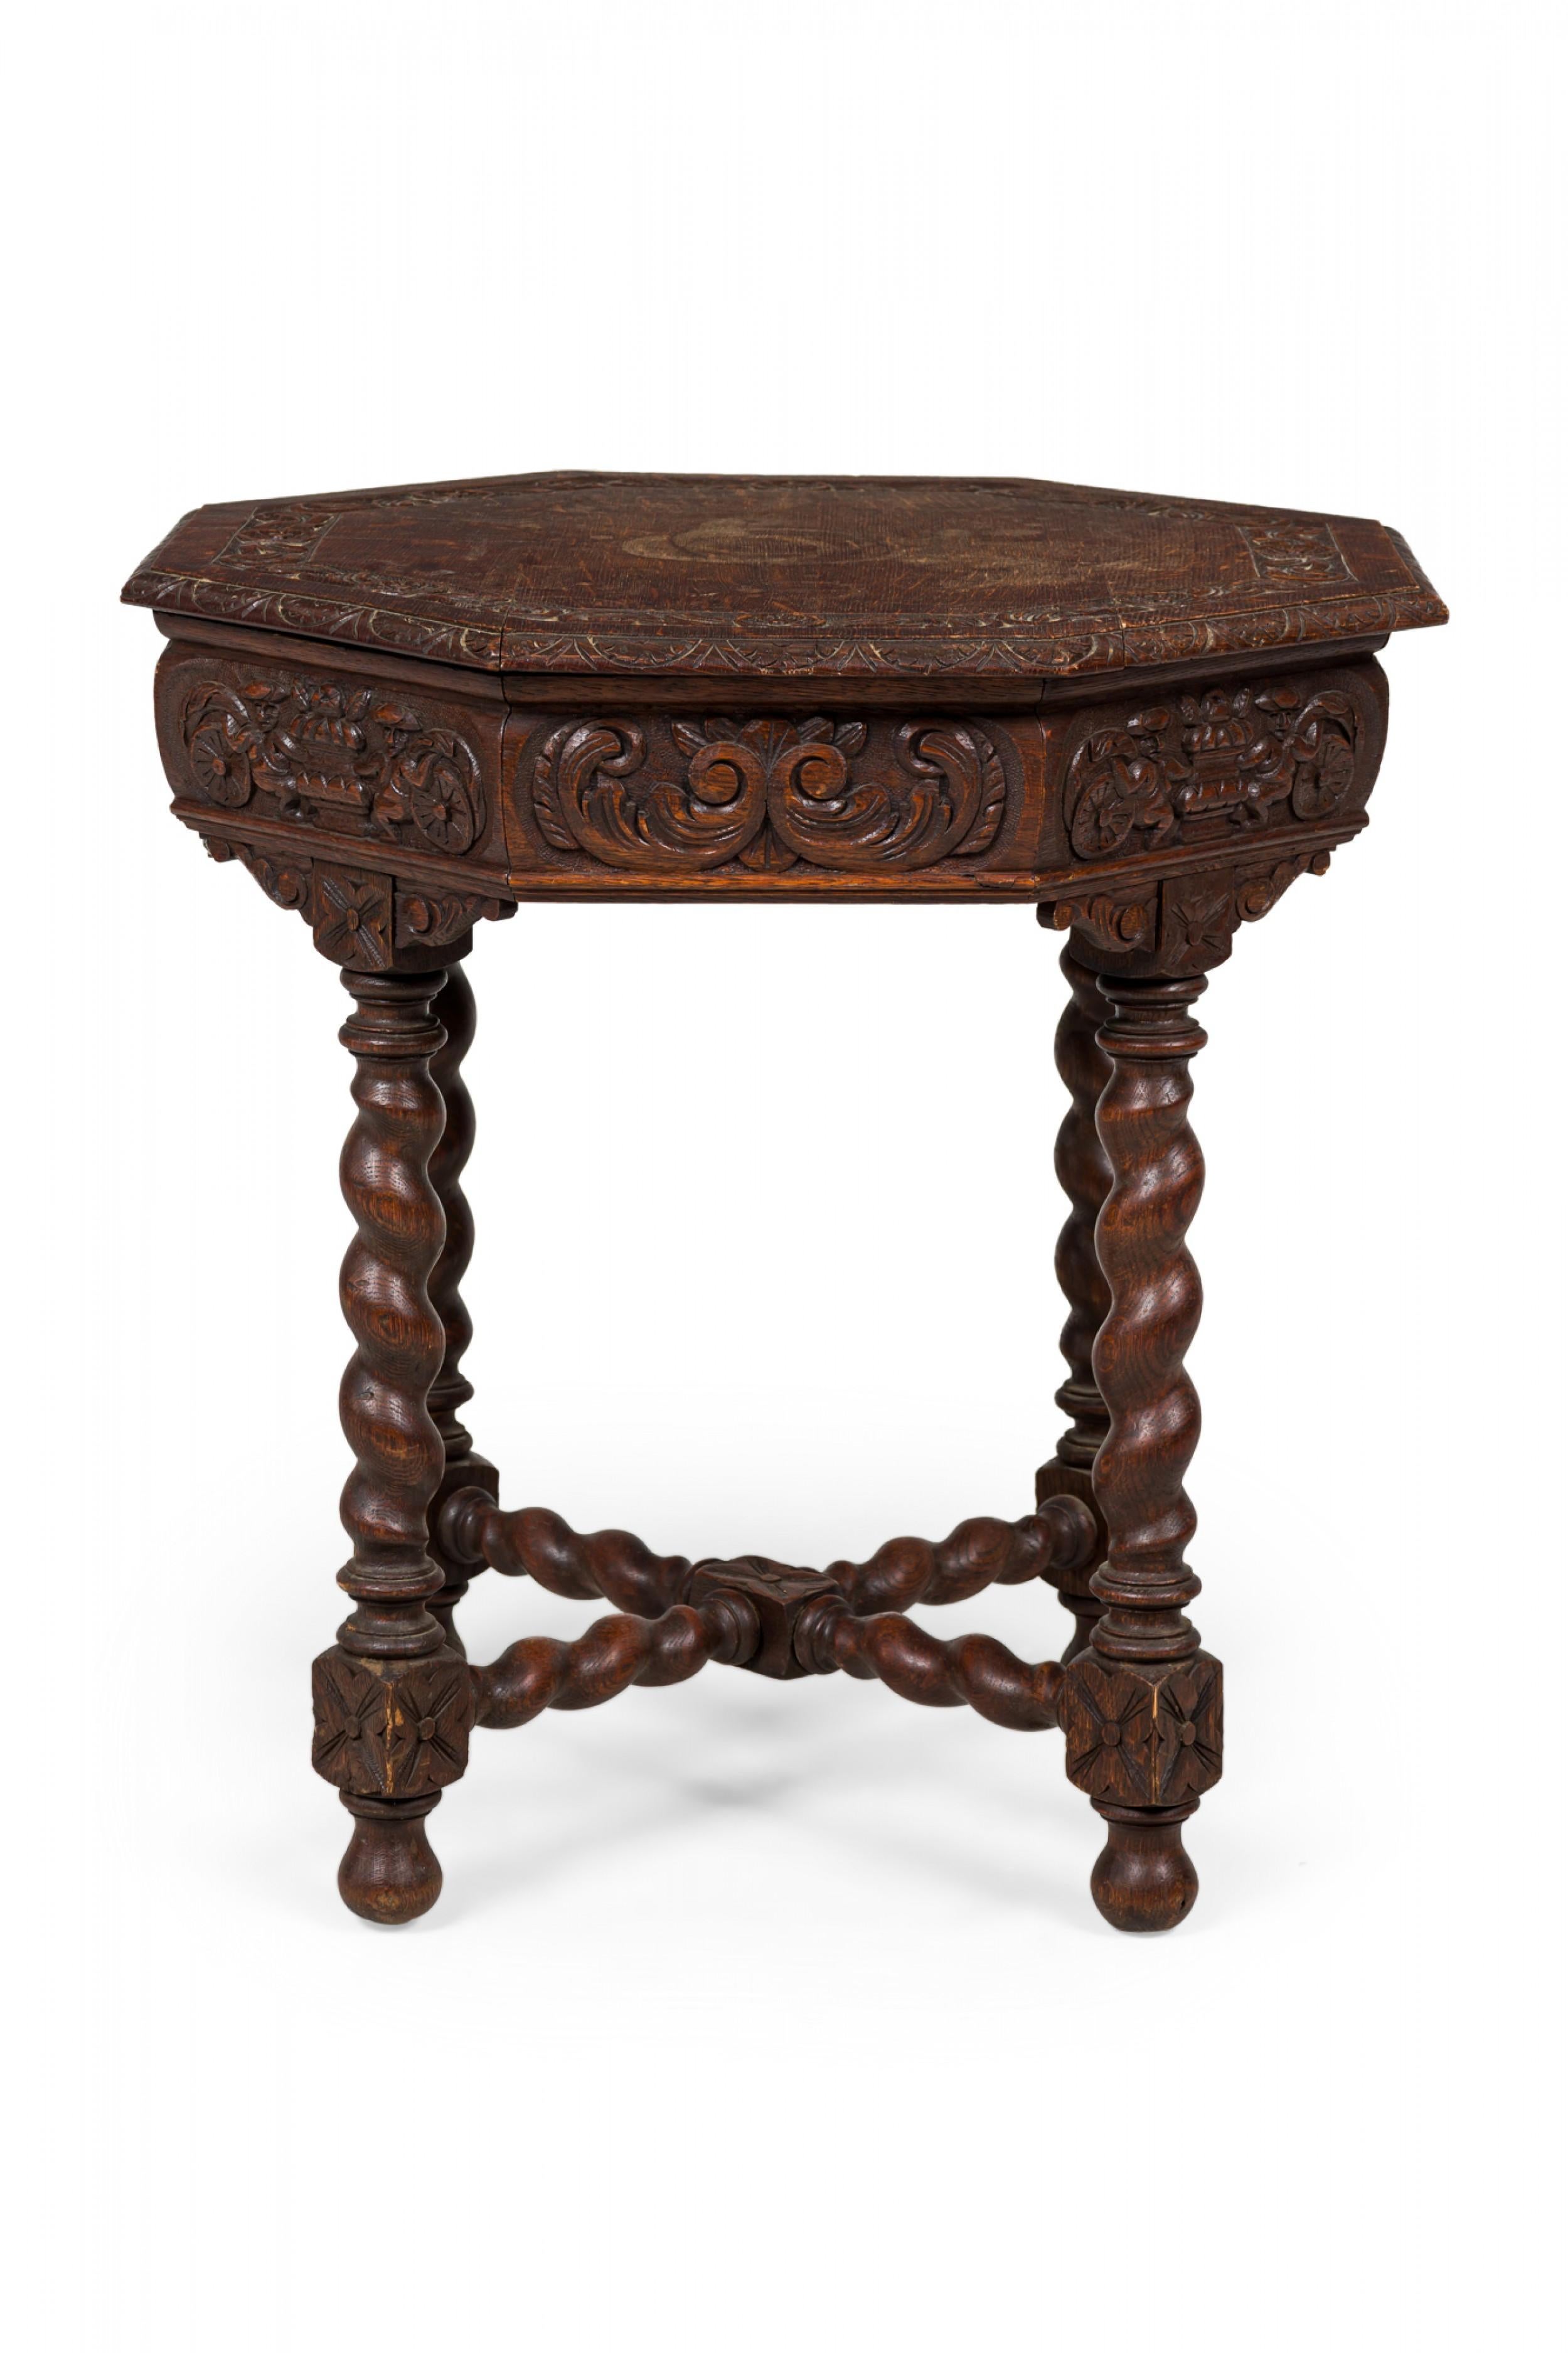 20th Century English Jacobean-Style Carved Spiral Turned Leg Octagonal Occasional/Side Table For Sale